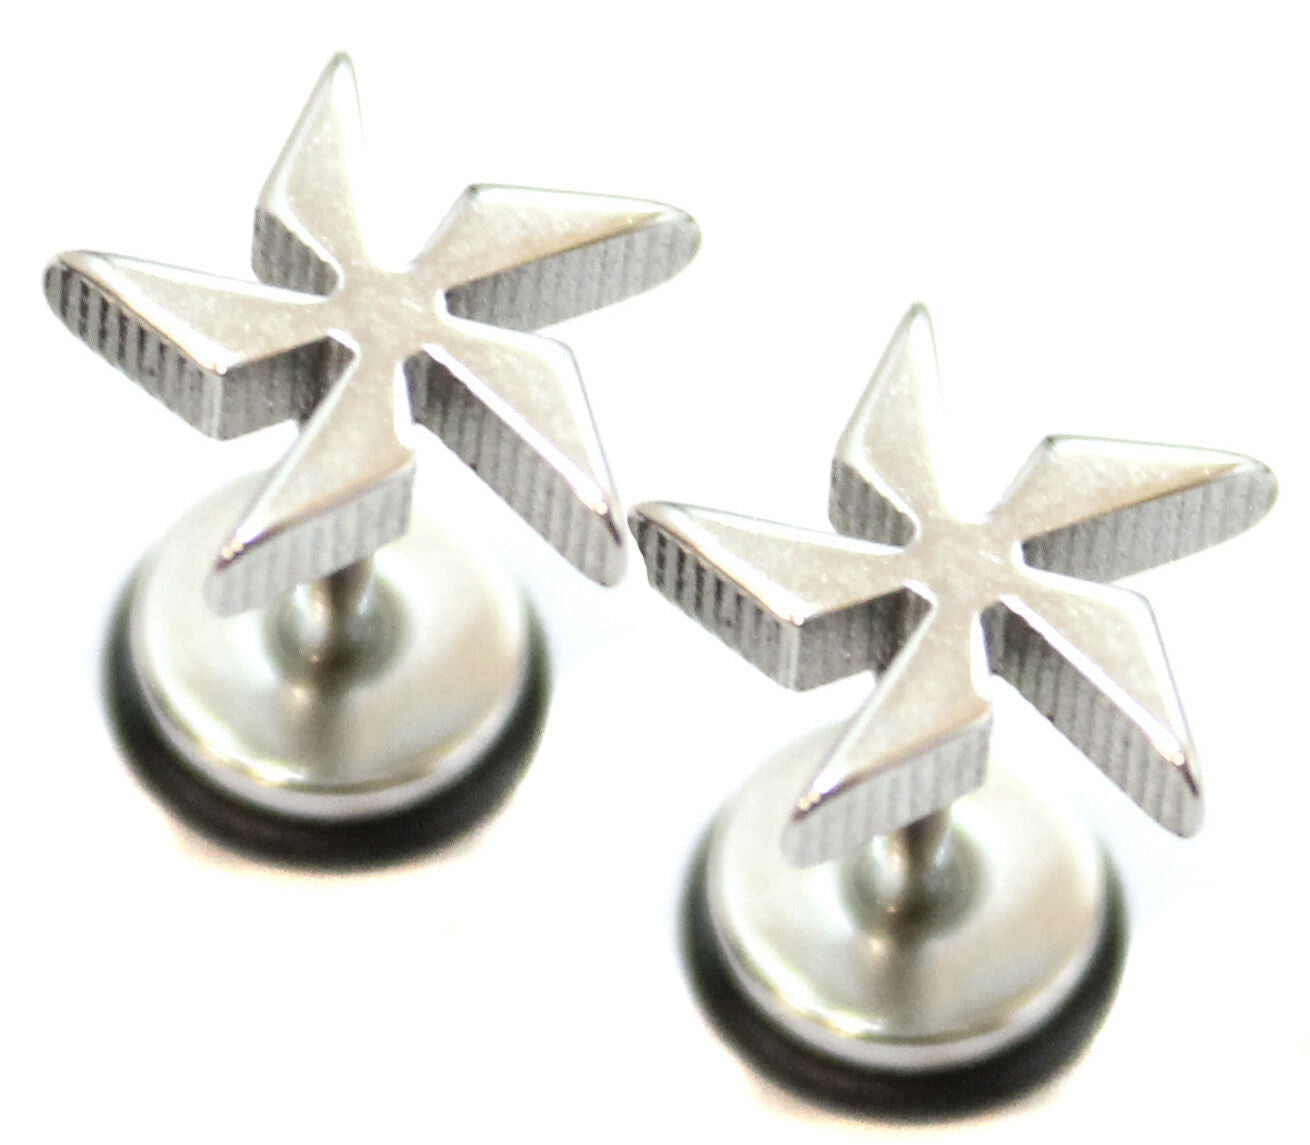 Windmill Spike Stainless Steel Stud Mens Earring Body Fake Stretcher Goth Upper